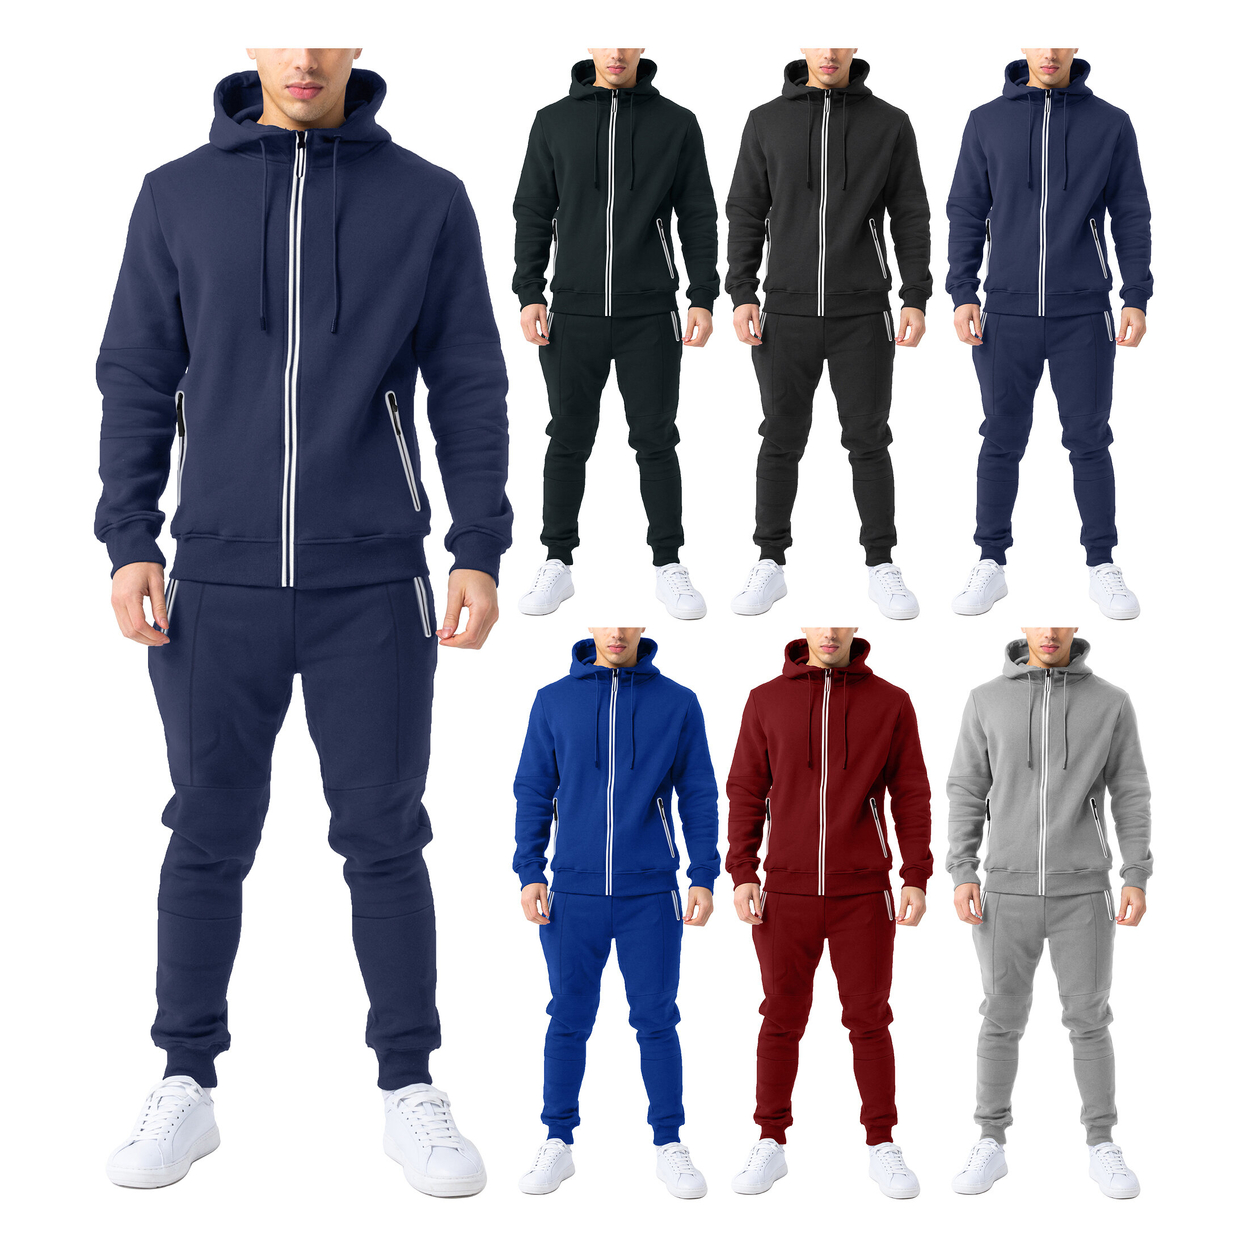 2-Pack: Men's Cozy Slim Fit Active Athletic Full Zip Hoodie And Jogger Tracksuit - Red& Black, Small